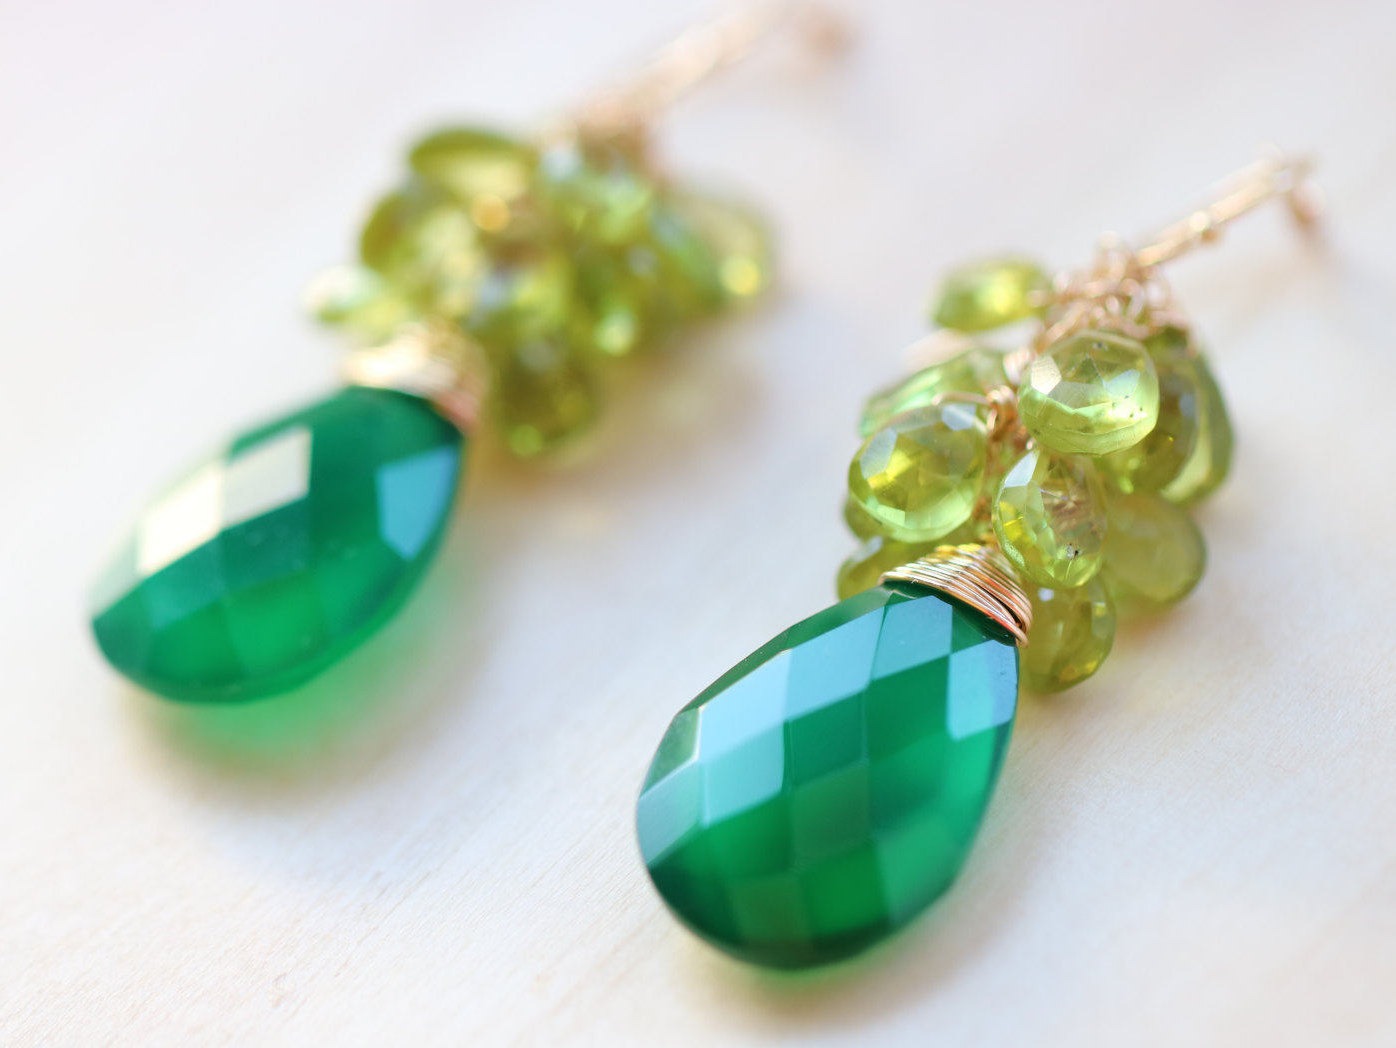 Green Onyx with Olive Green Peridot Gemstone Cluster Earrings in Gold Filled